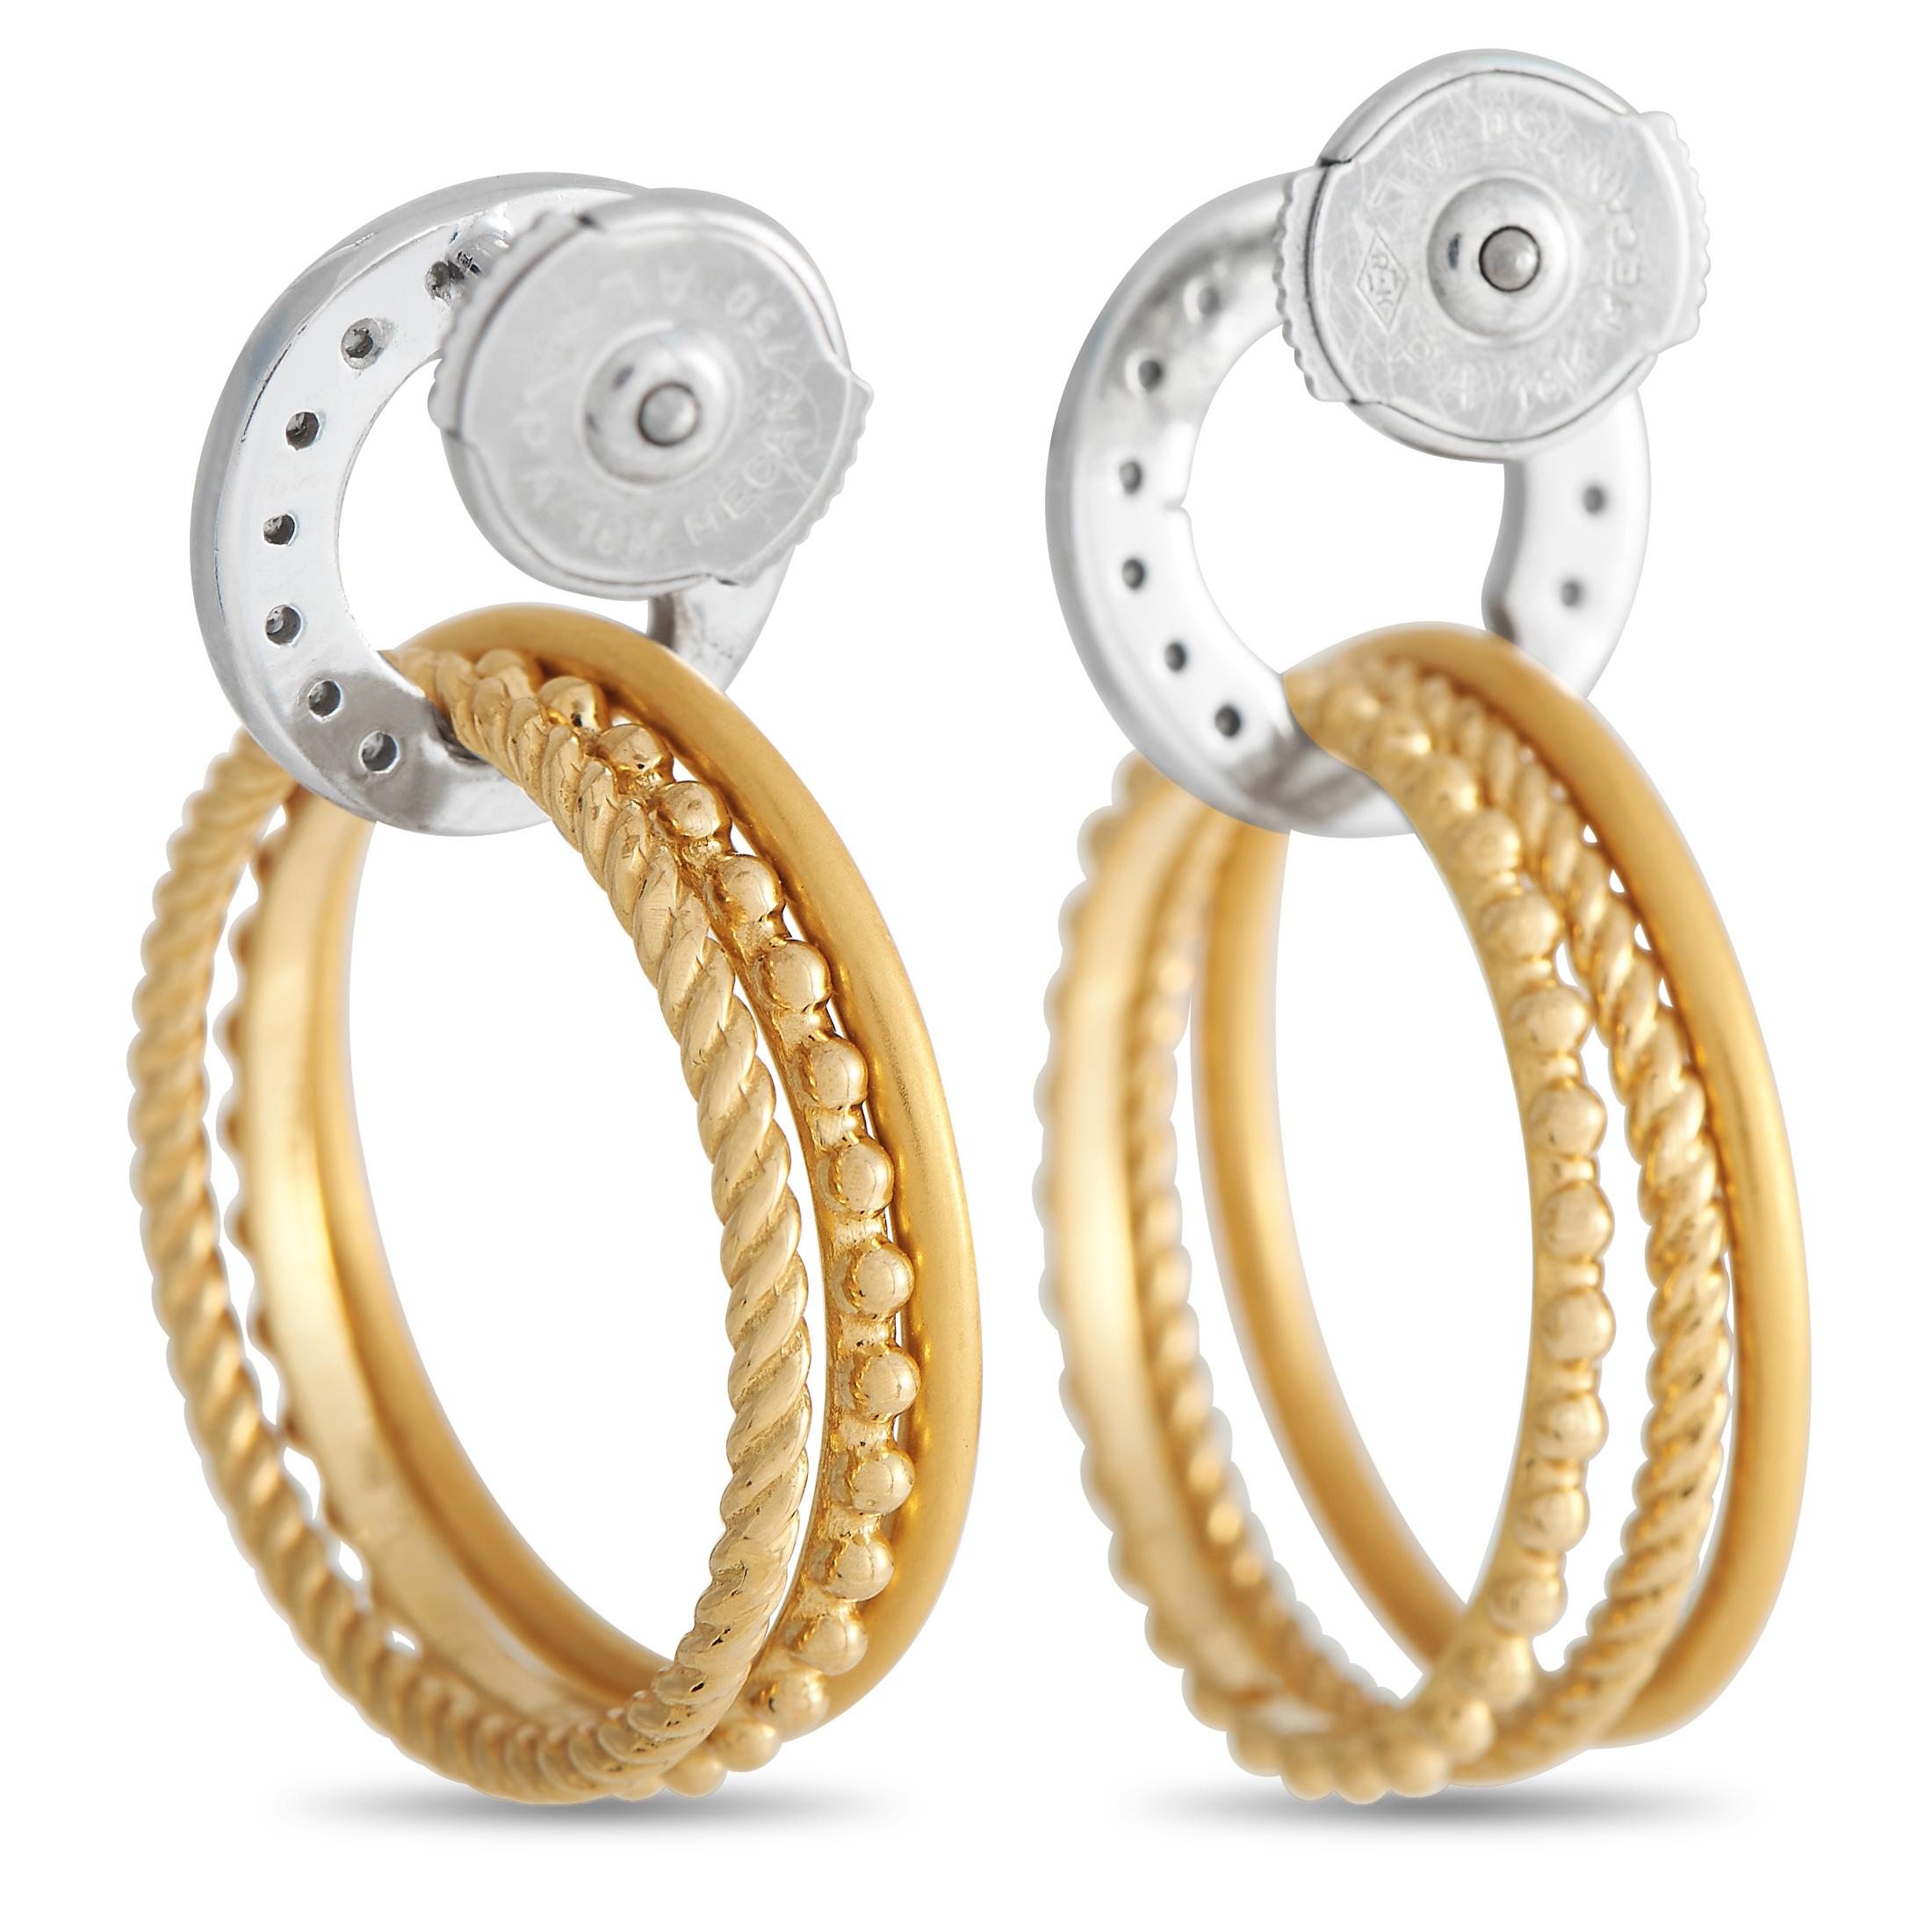 Stunning craftsmanship is boldly on display in these Carrera y Carrera earrings. On this elegant accessory, delicate 18K Yellow Gold hoops dangle from a silver-toned circular motif that is accented by 0.30 carats of sparkling round-cut diamonds.